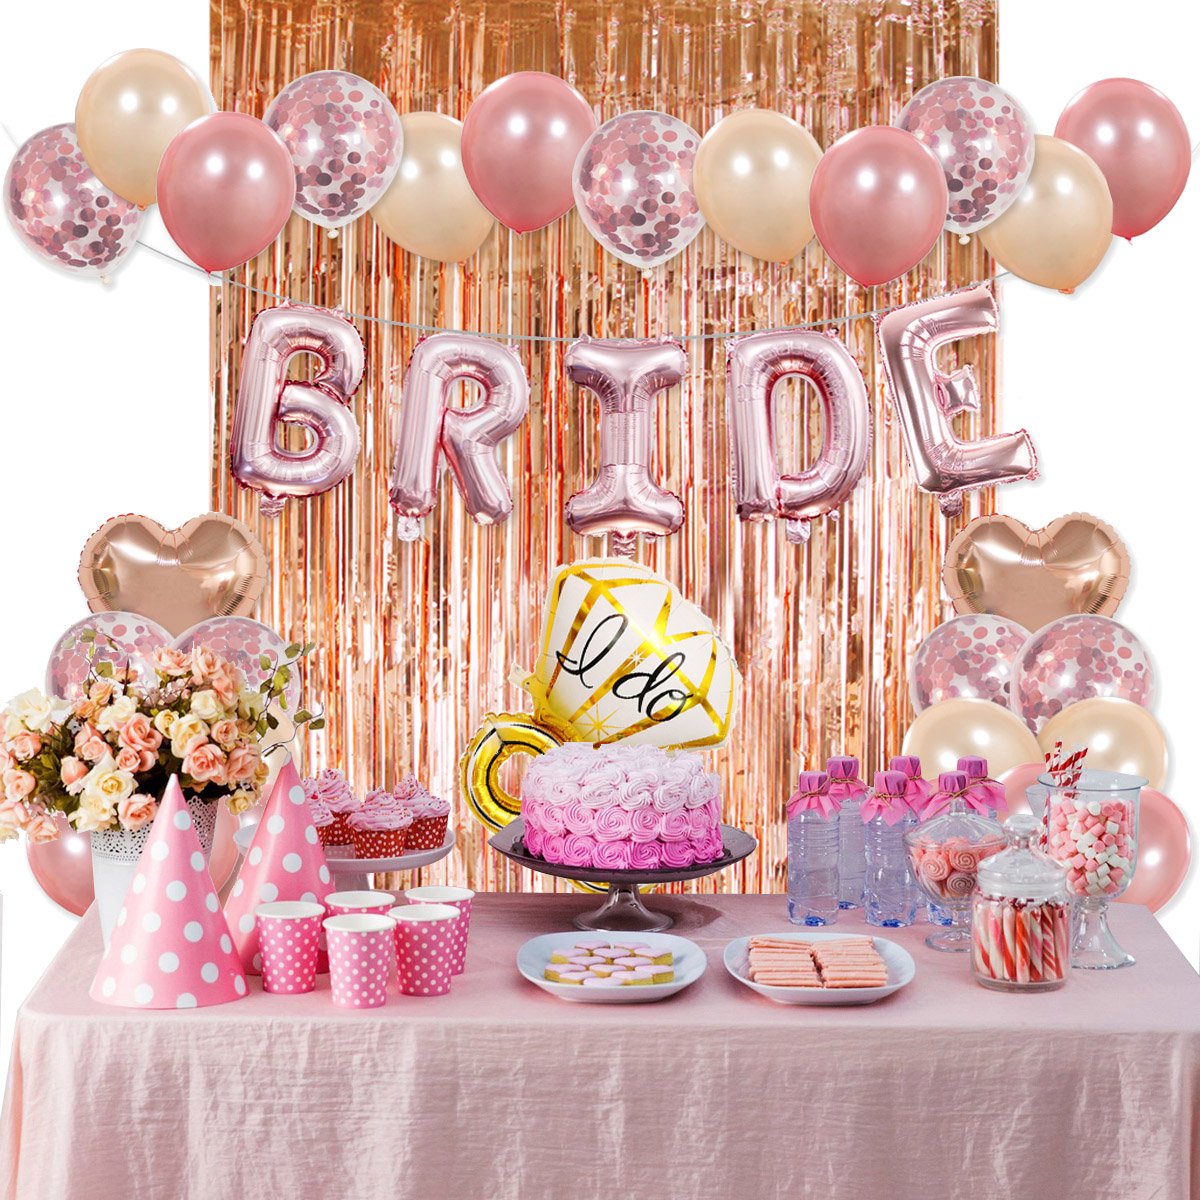  Girls Bride To Be Party Decorations Set 